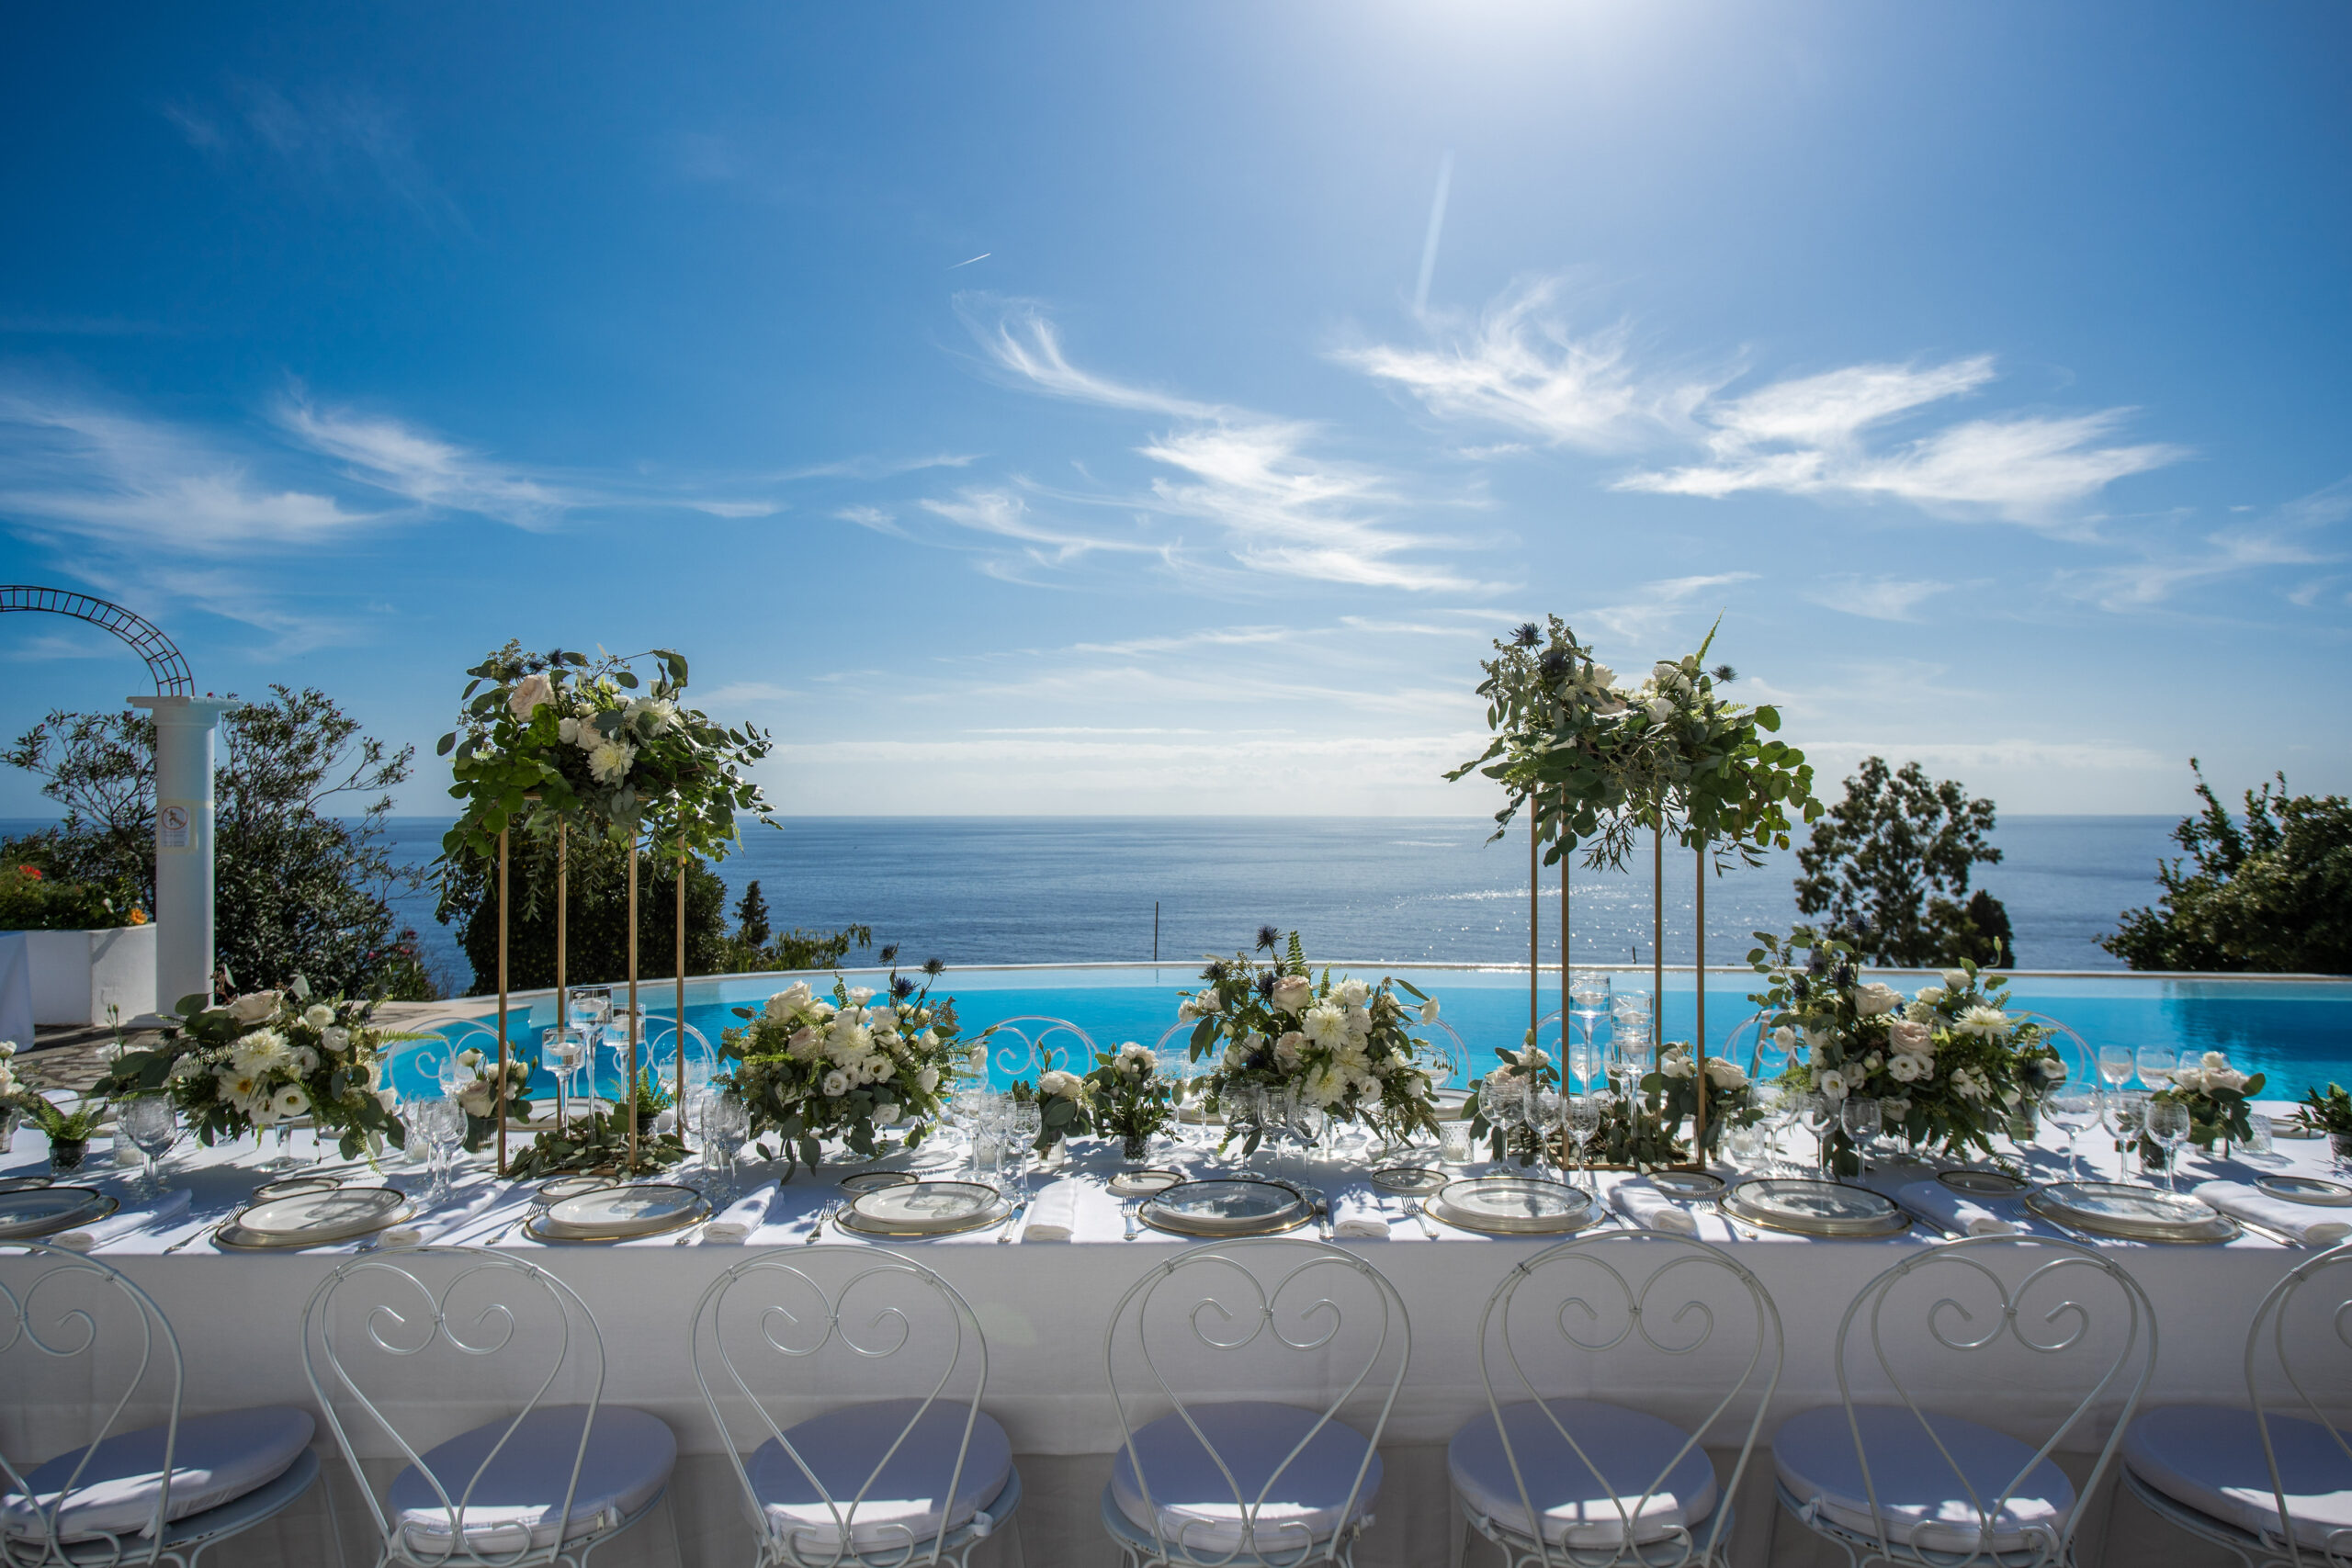 The insider’s guide to luxury wedding villas in Europe